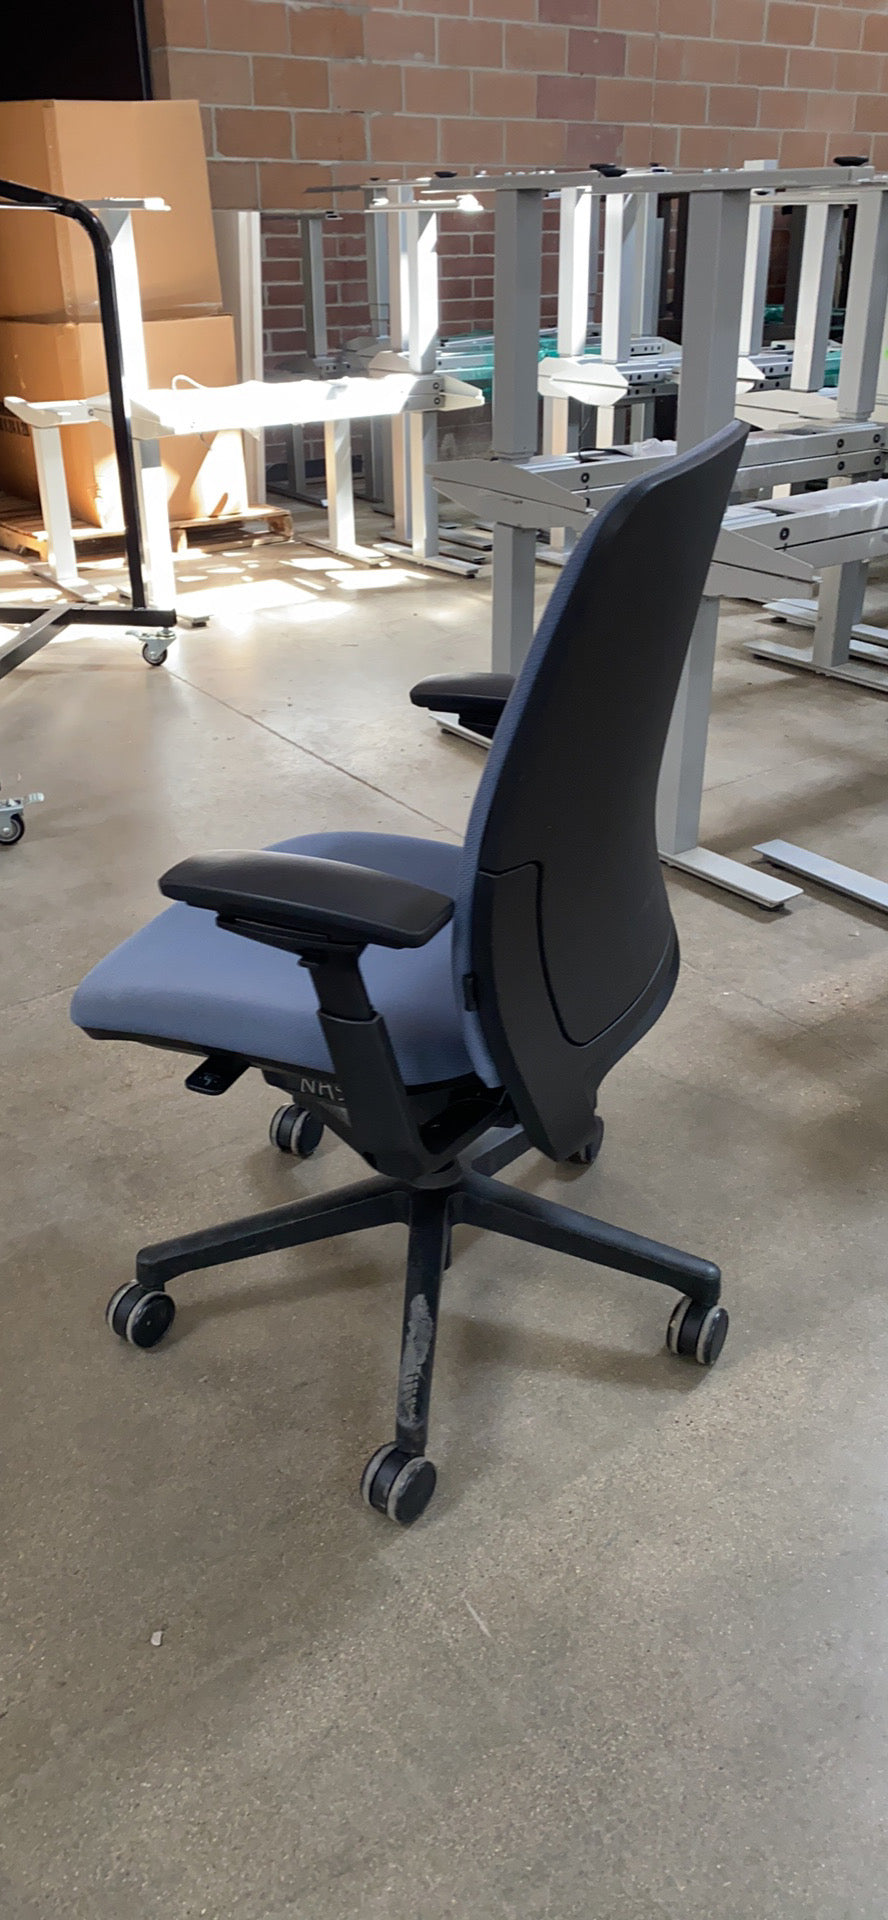 side view of Steelcase Amia chair in light blue